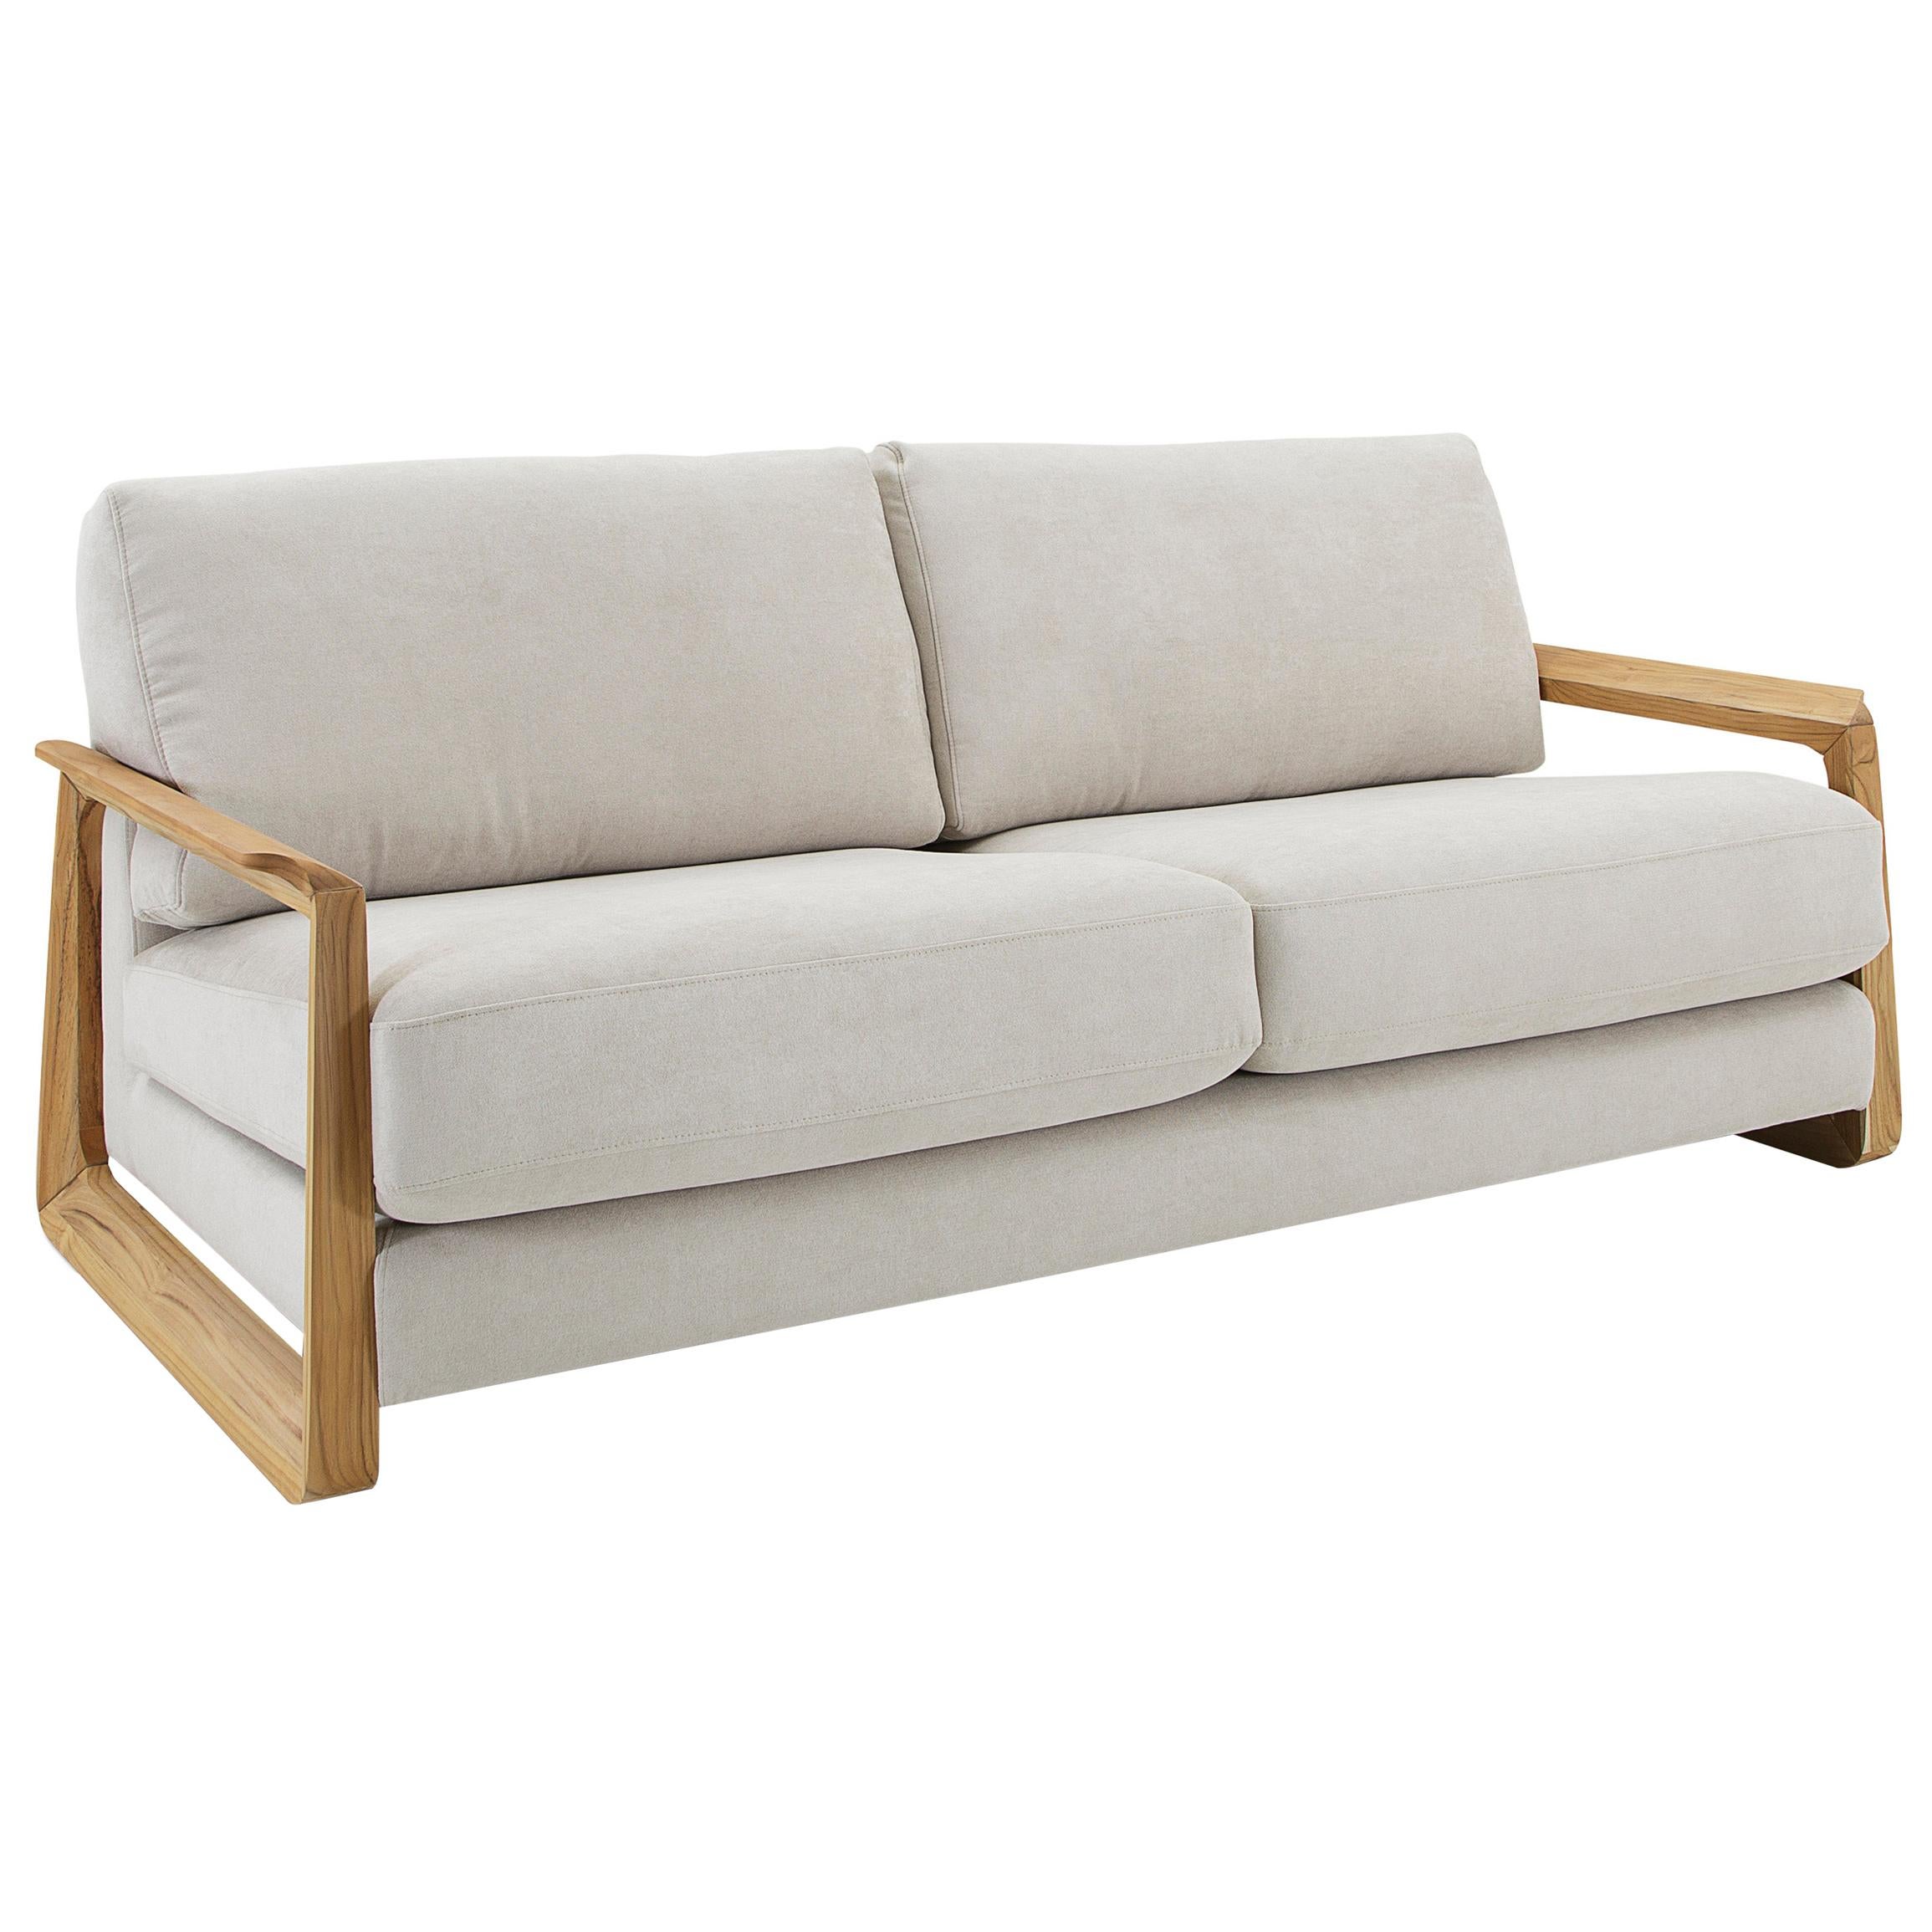 Fine Three-Seat Sofa Upholstered in an Oatmeal Fabric and Teak Wood Arms For Sale